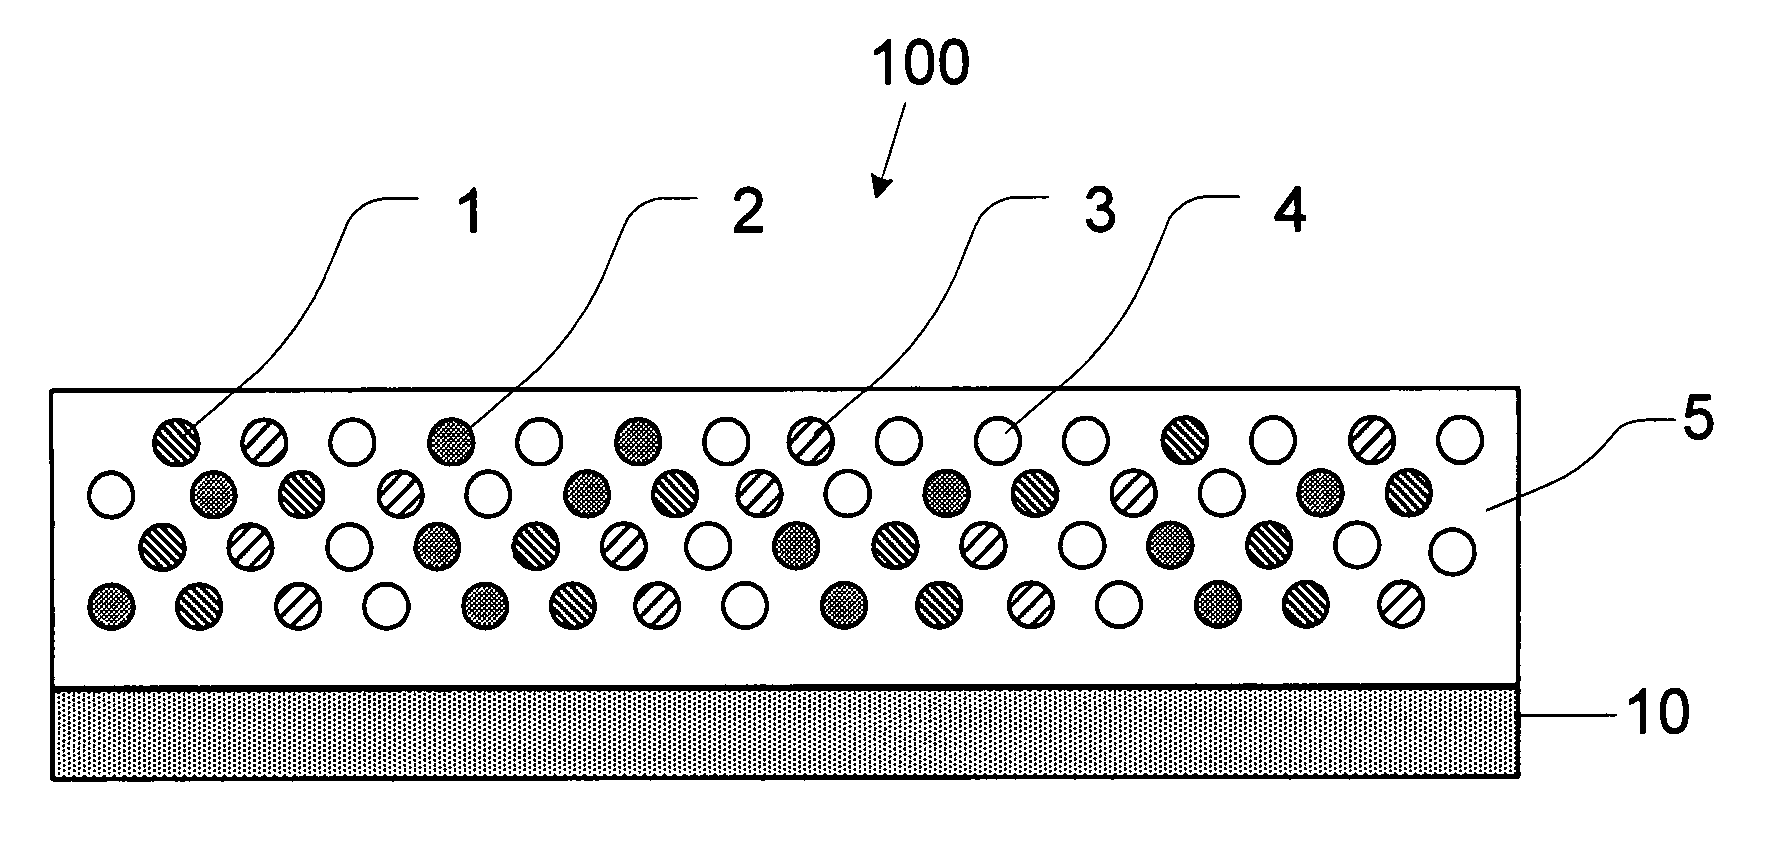 Silicone photoluminescent layer and process for manufacturing the same